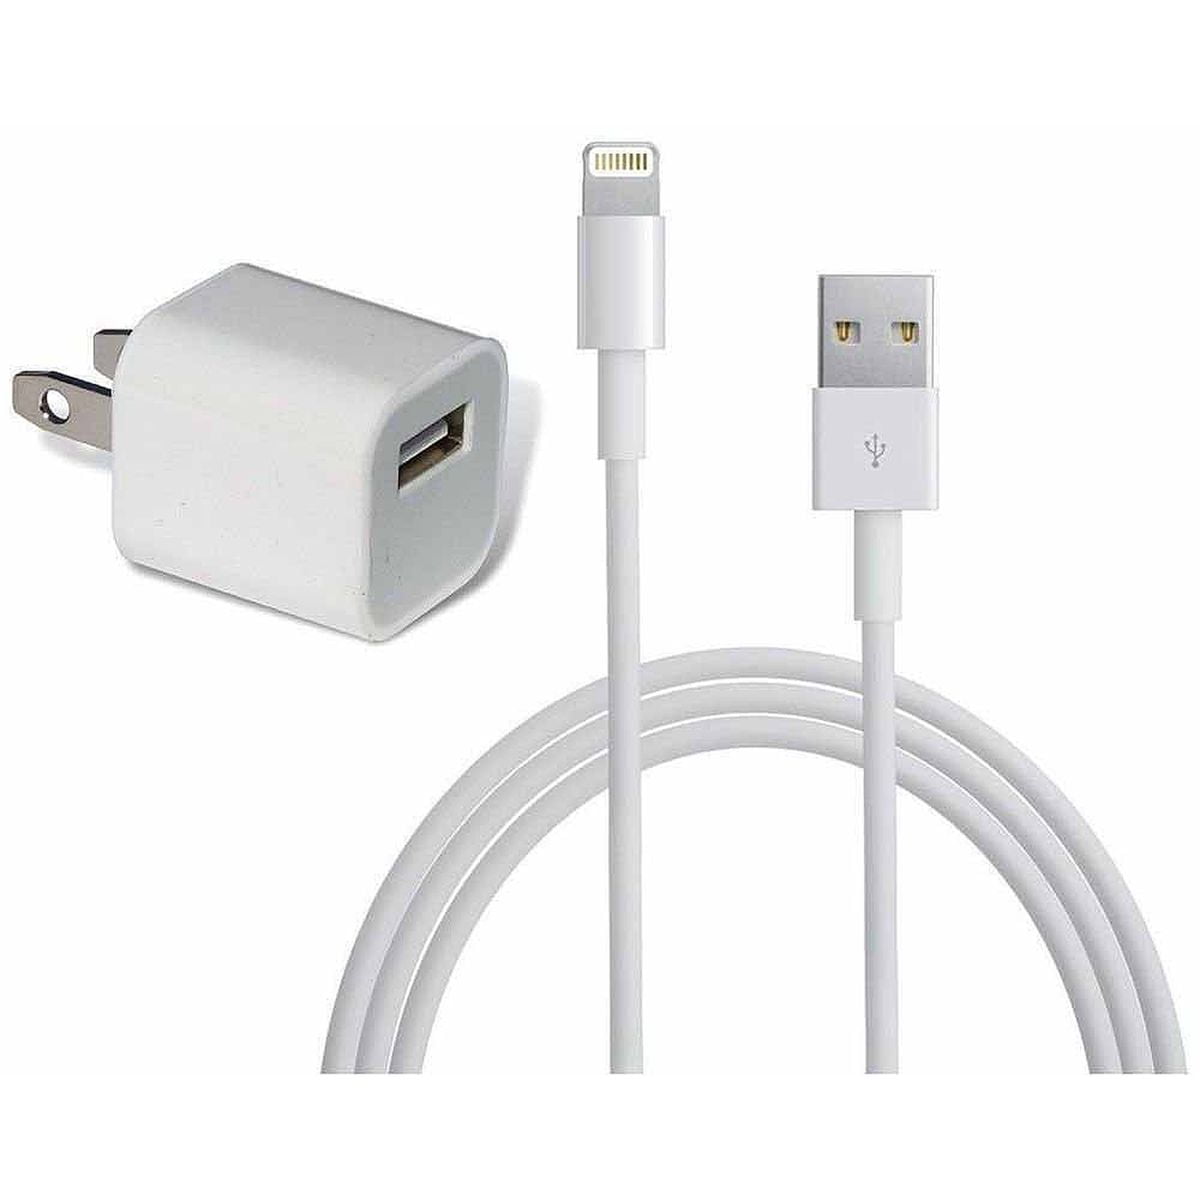 After the Earpods and the charger, Apple wants to remove the lightning cable 